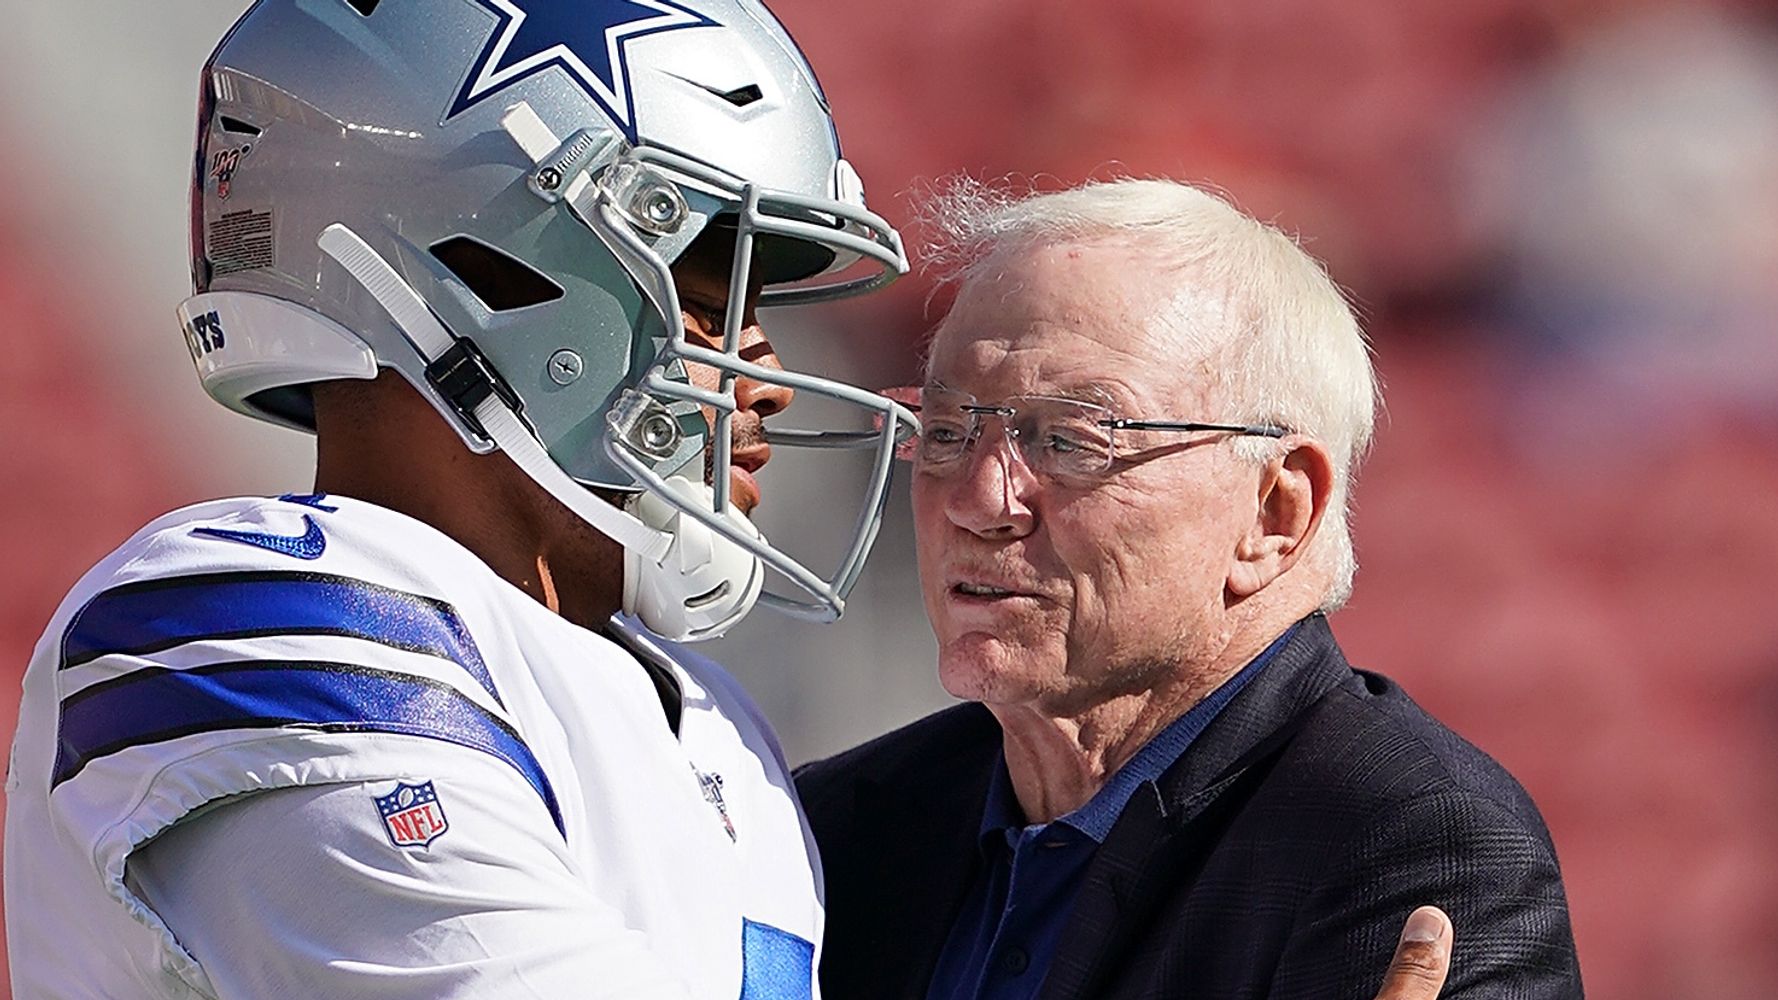 Dallas Cowboys owner slaps on ‘the hit of the jackpot’ with gas prices as the Texans suffer